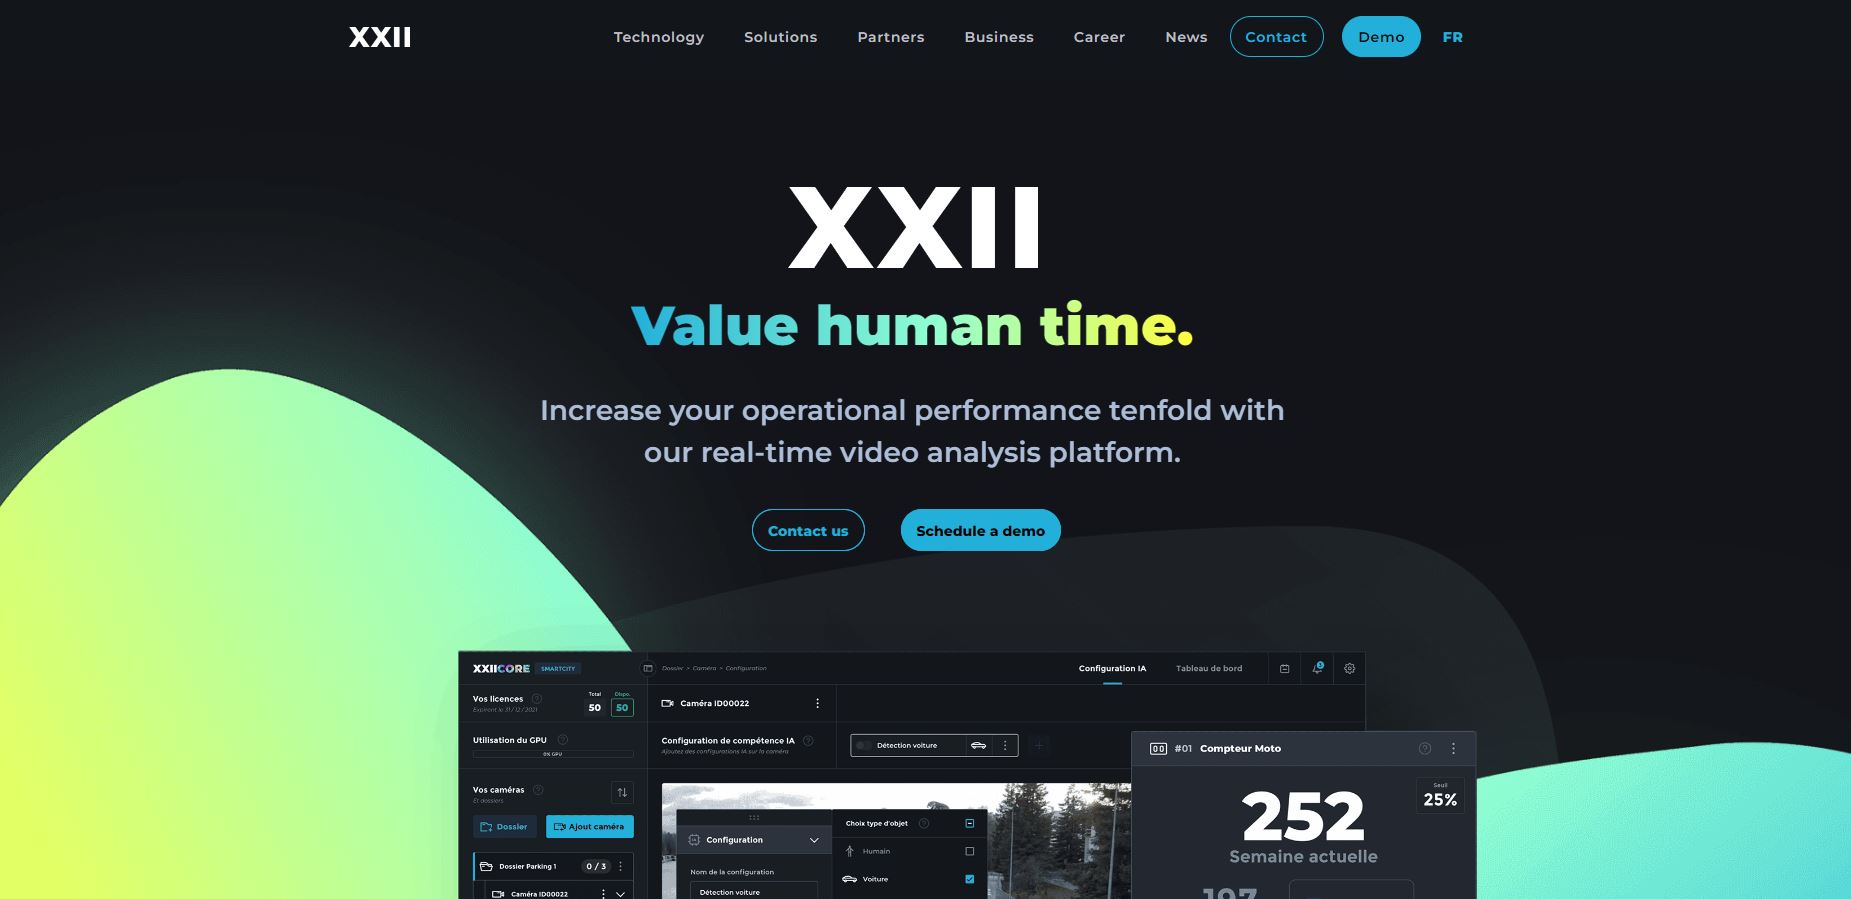 XXII, The French-based startup recently raised a remarkable $22 million in Series A funding